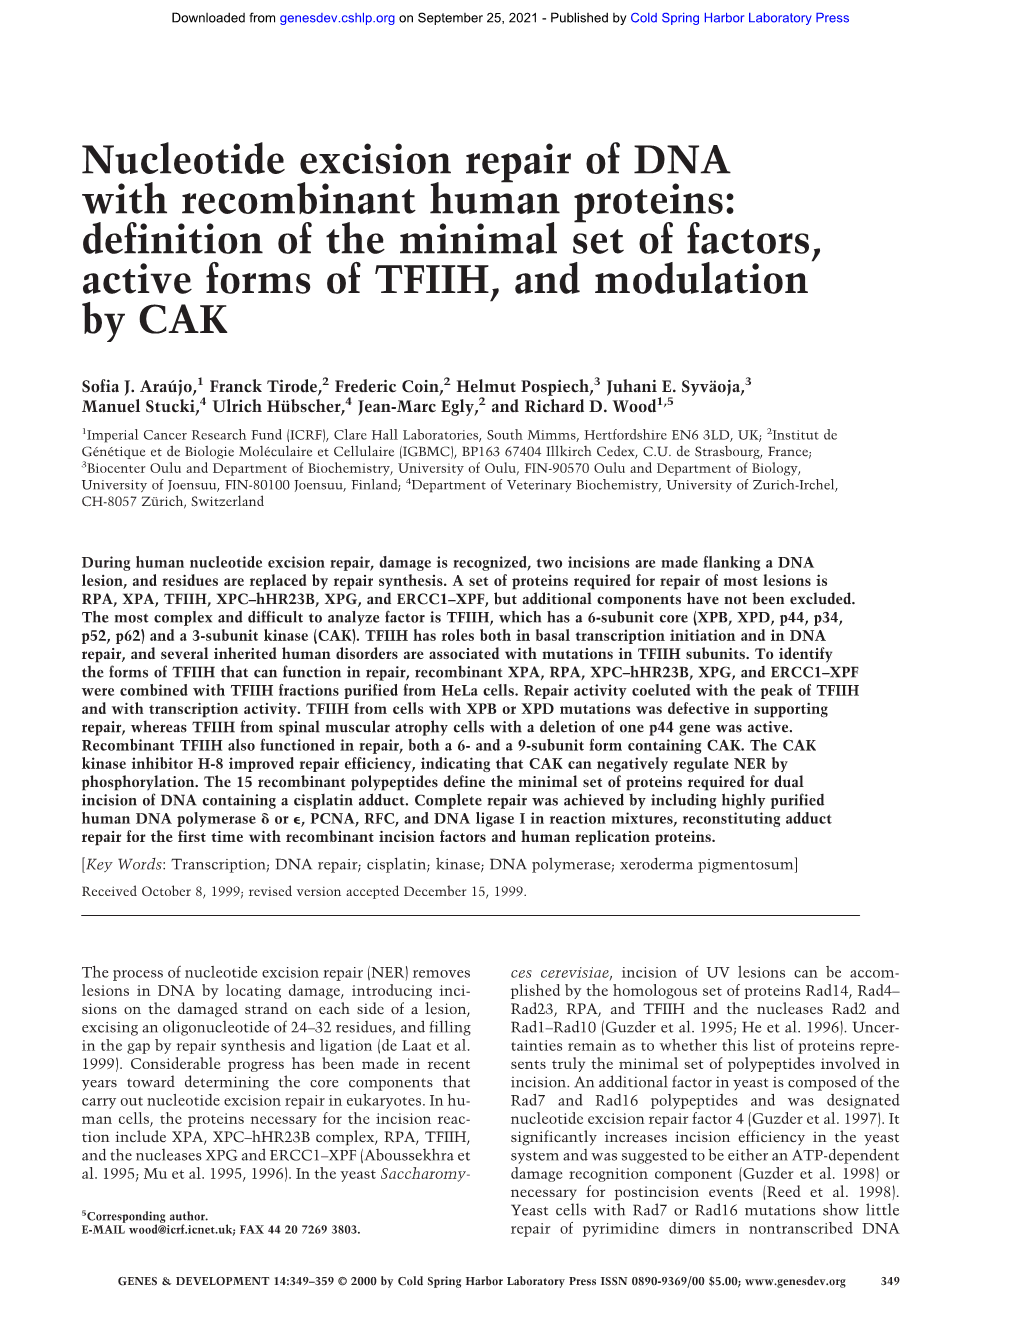 Nucleotide Excision Repair of DNA with Recombinant Human Proteins: Definition of the Minimal Set of Factors, Active Forms of TFIIH, and Modulation by CAK